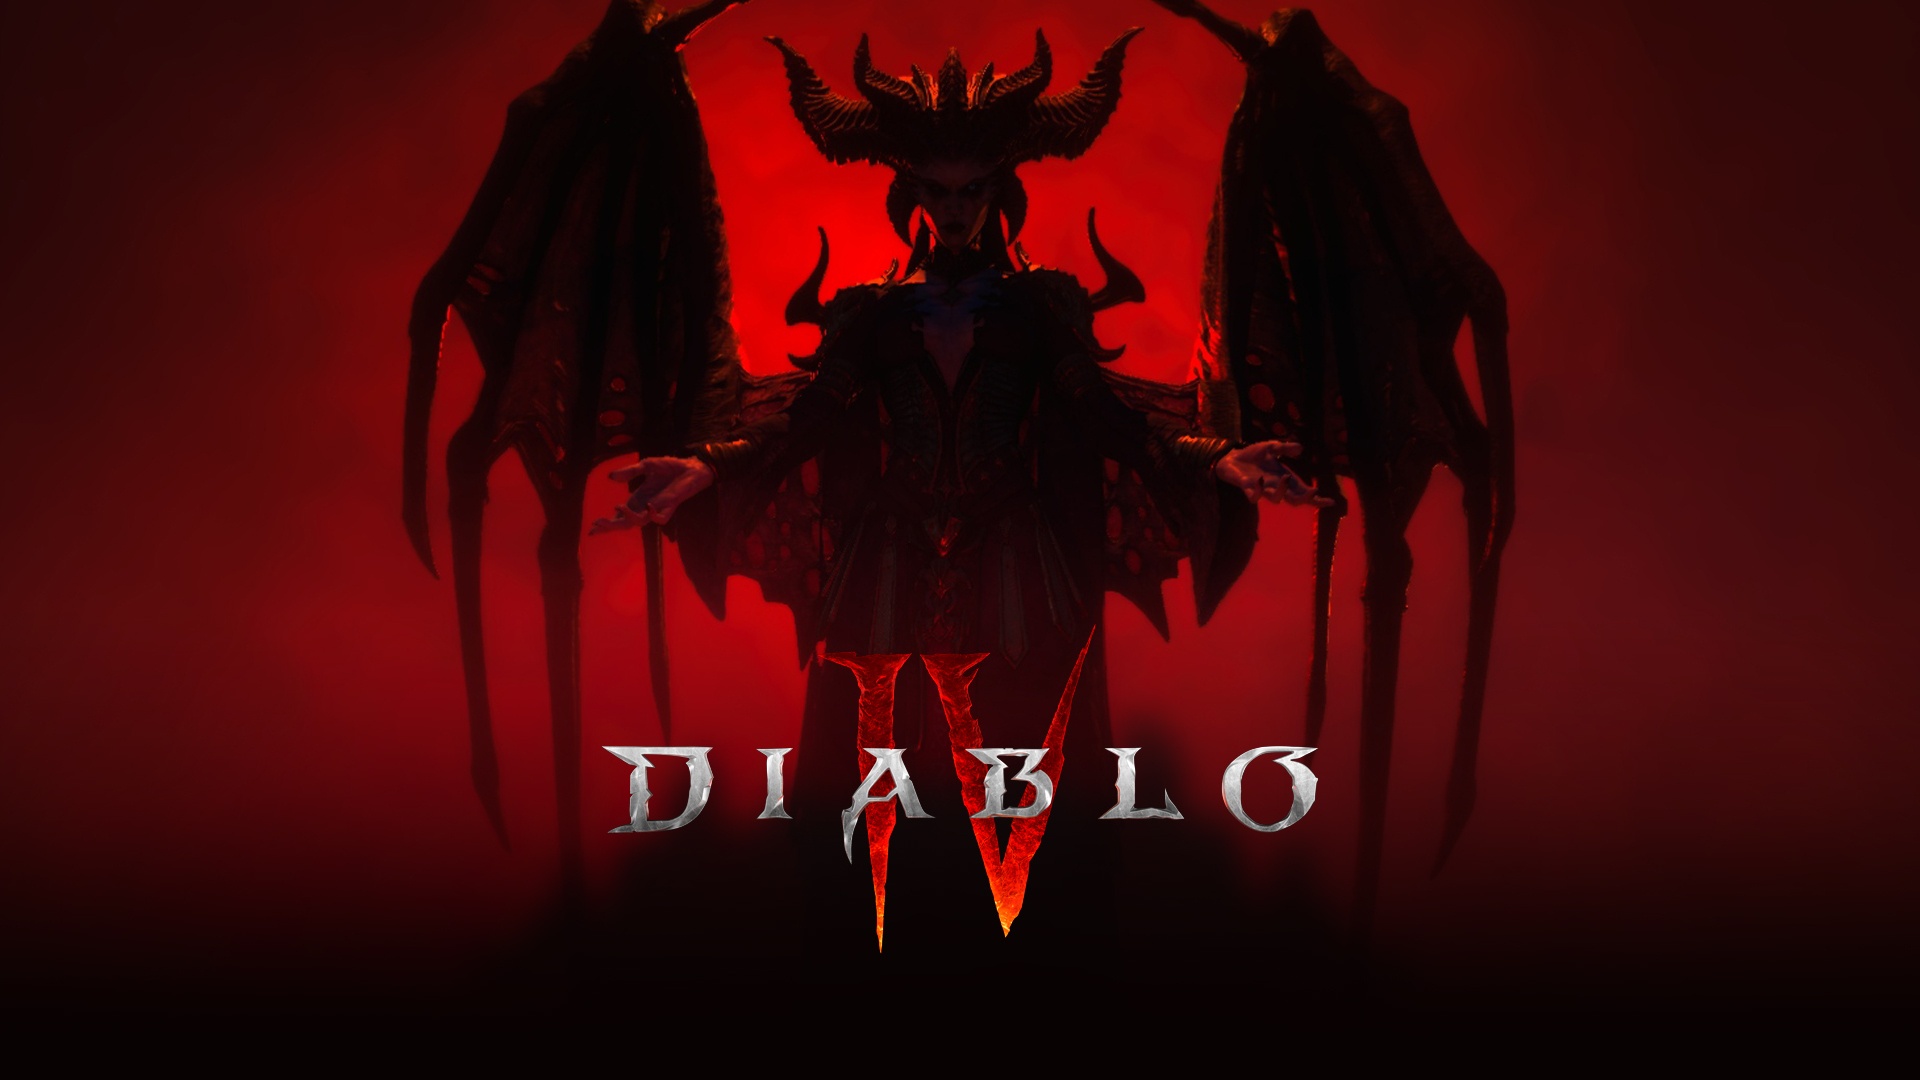 These are the minimum and recommended requirements to play Diablo IV when it launches on PC